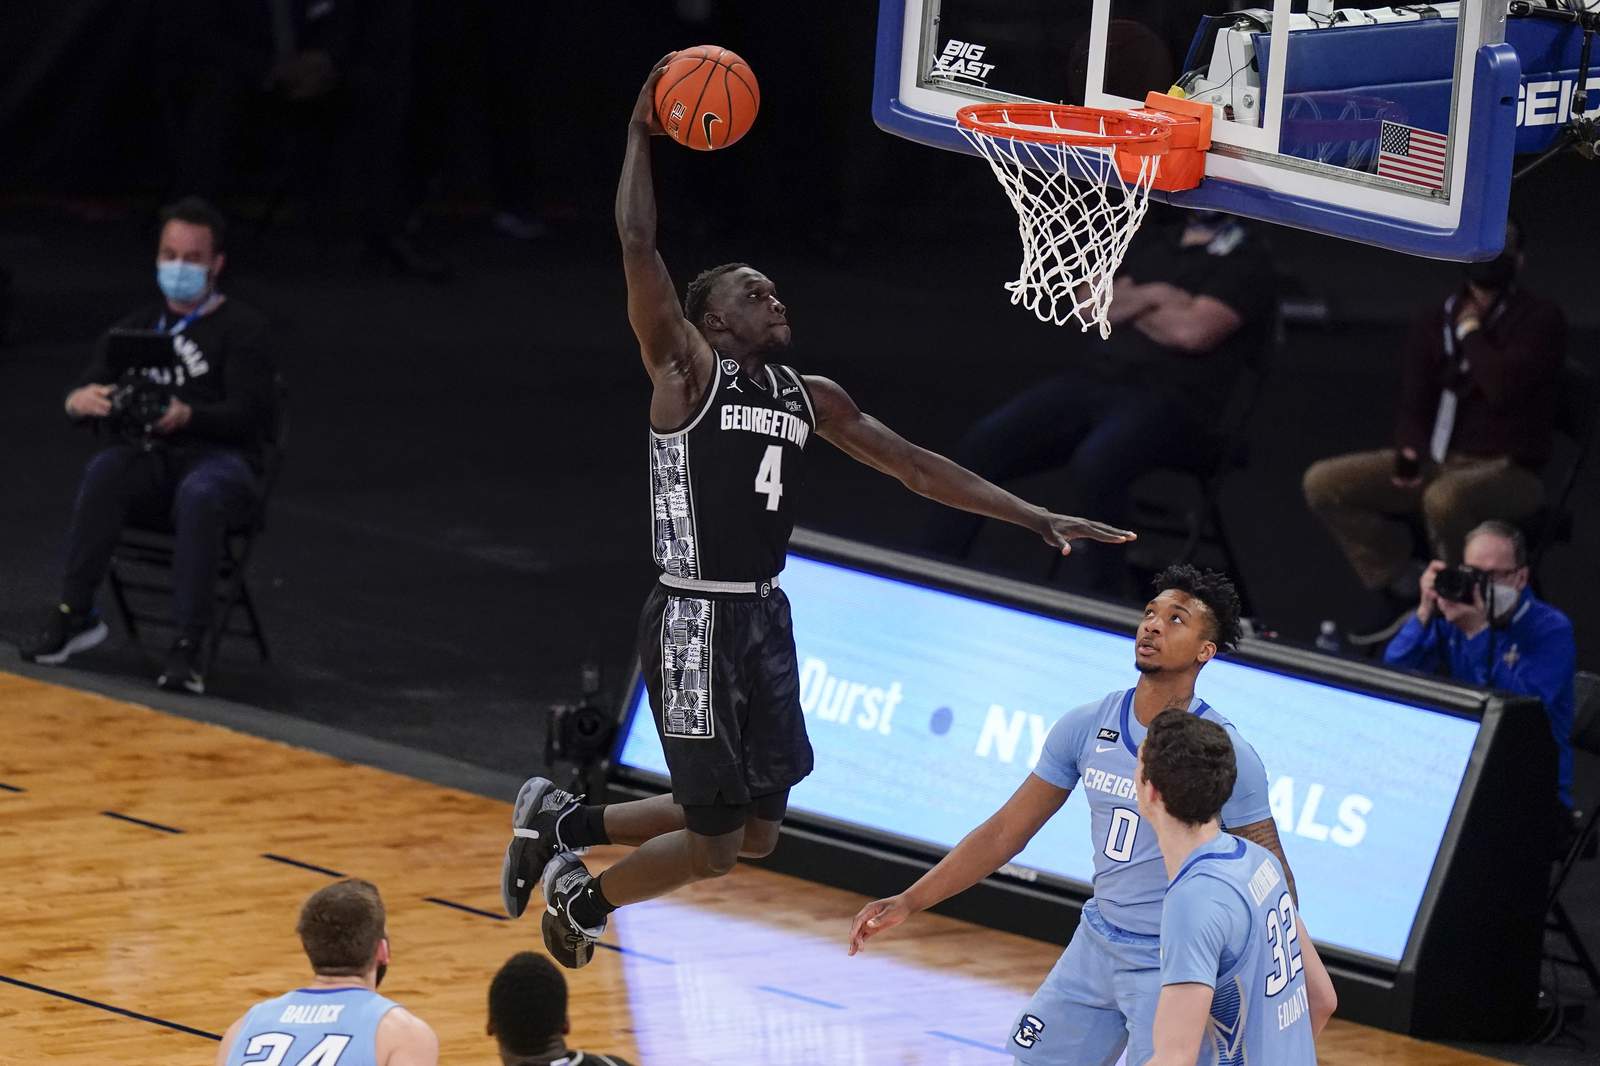 Ewing's exit? Hapless Hoyas blown out of Big East Tournament